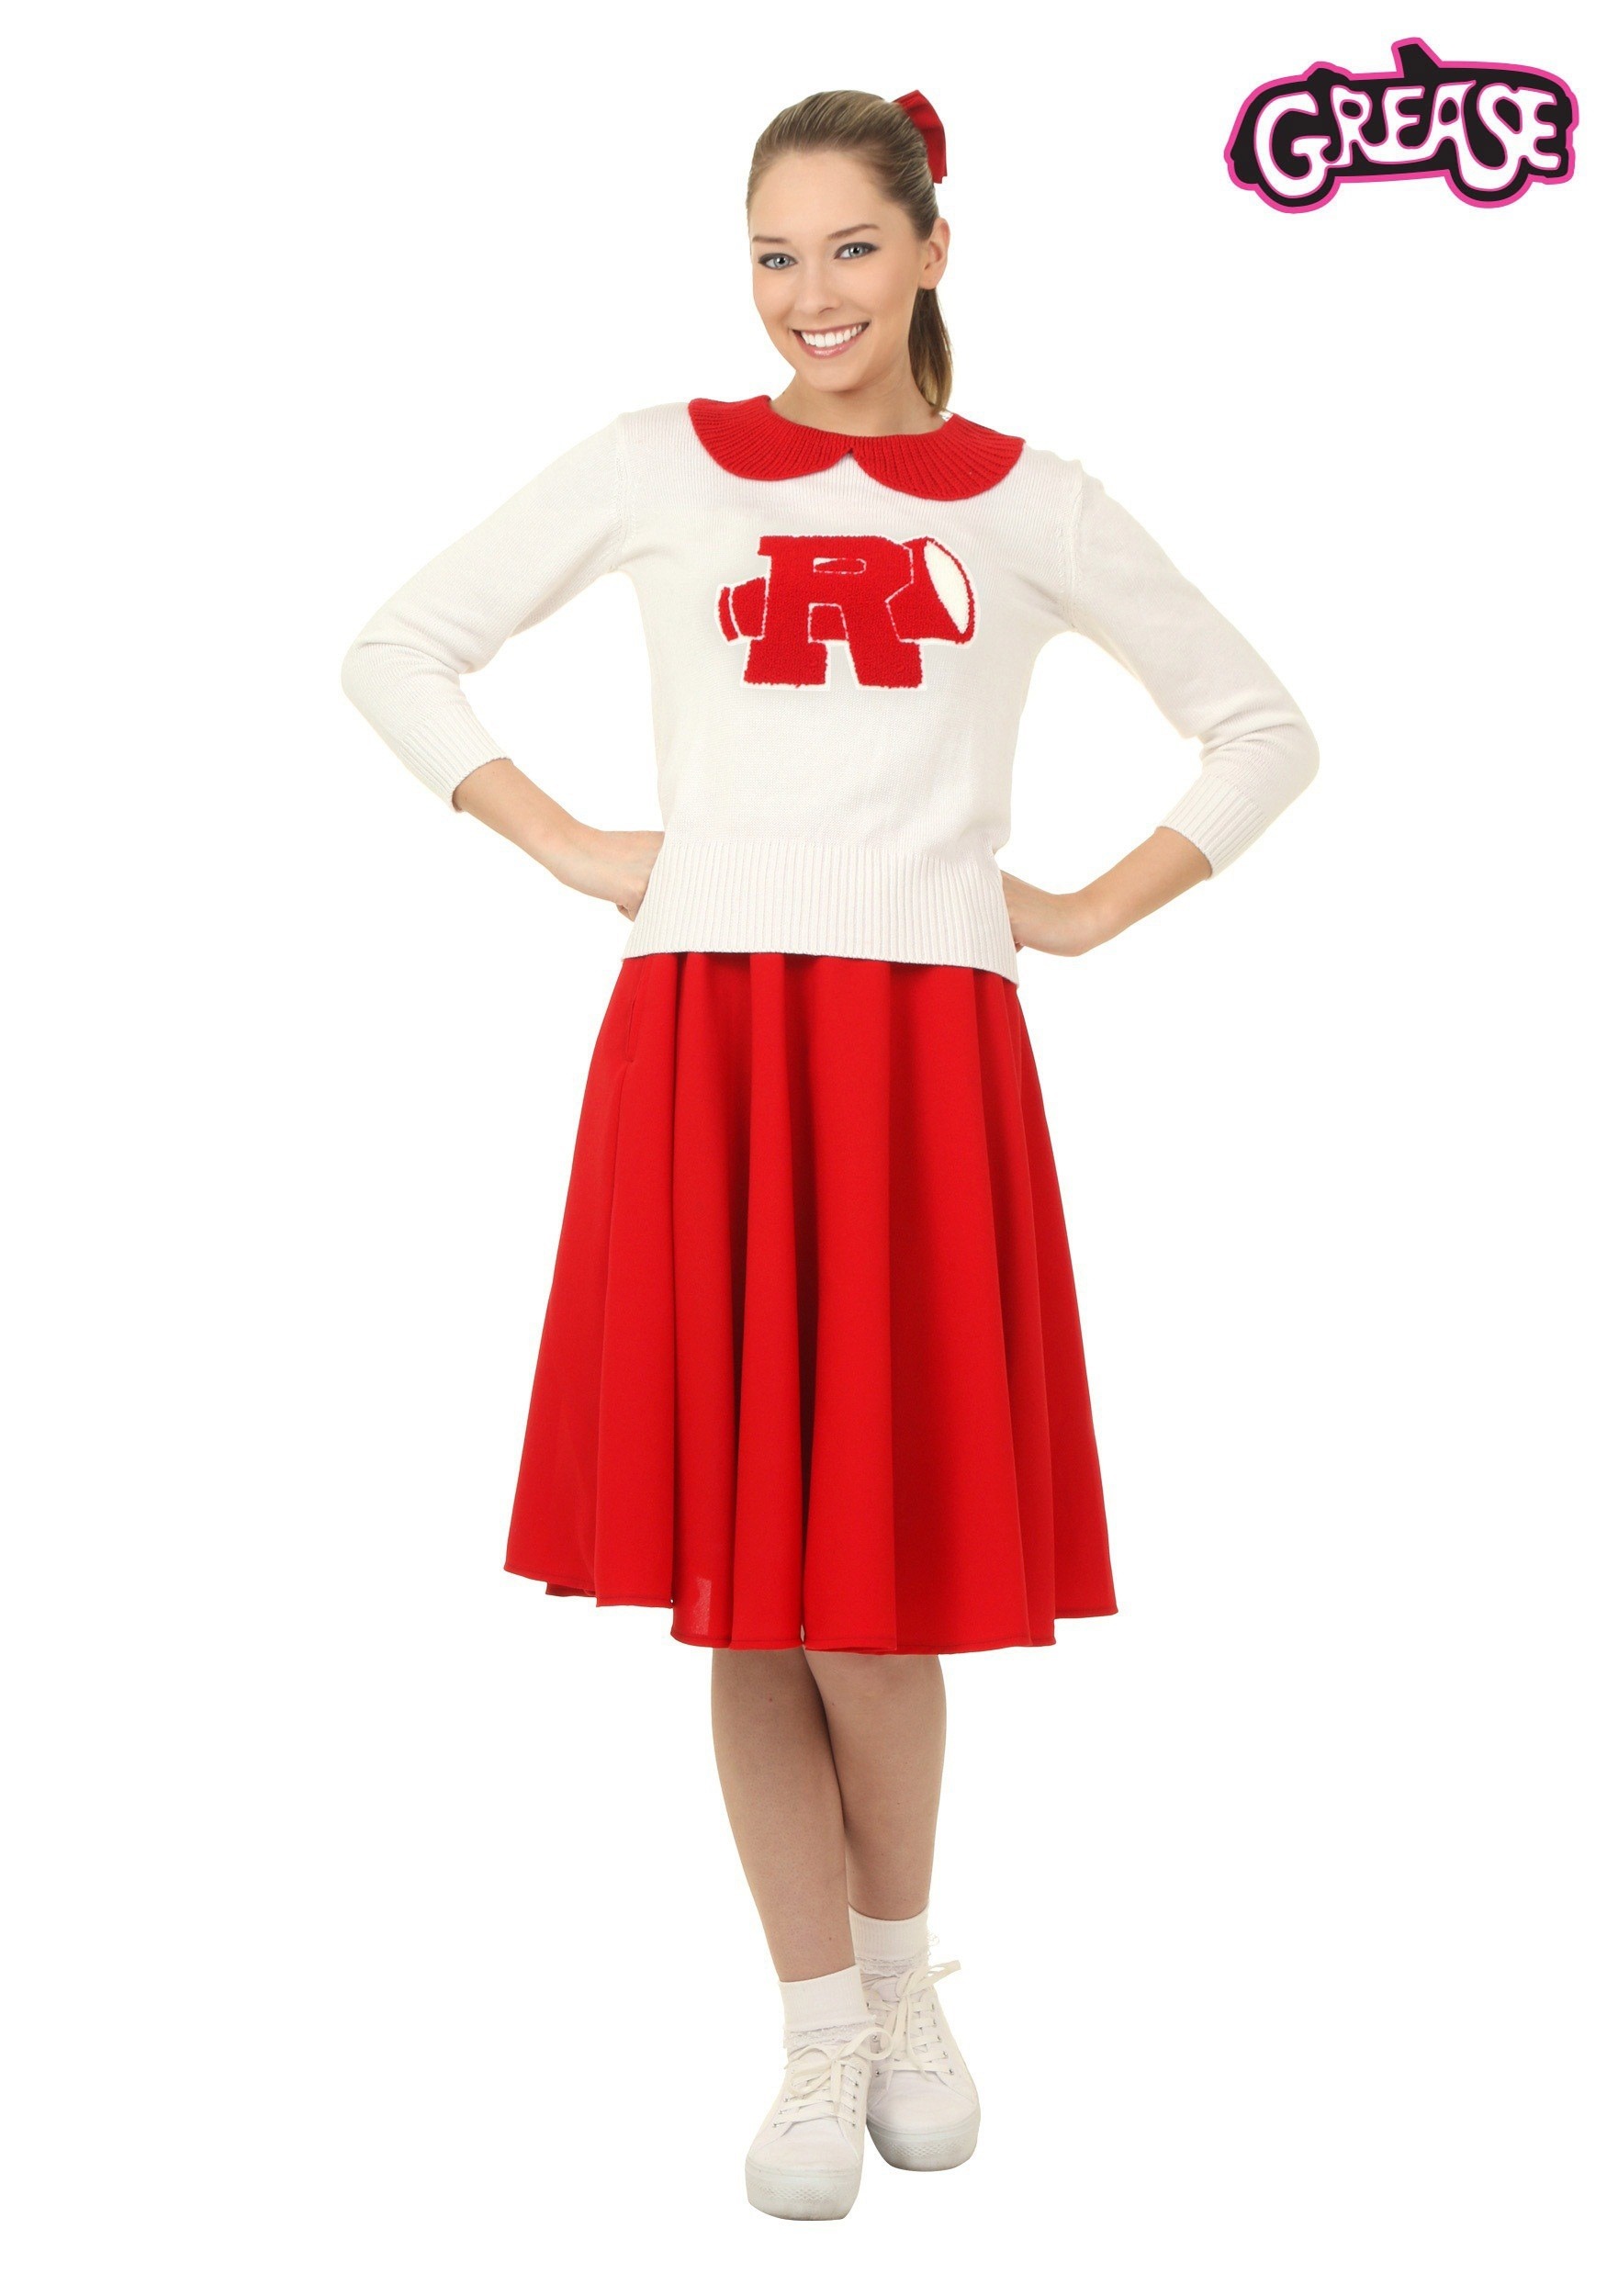 Grease Rydell High Plus Size Women’s Cheerleader Costume